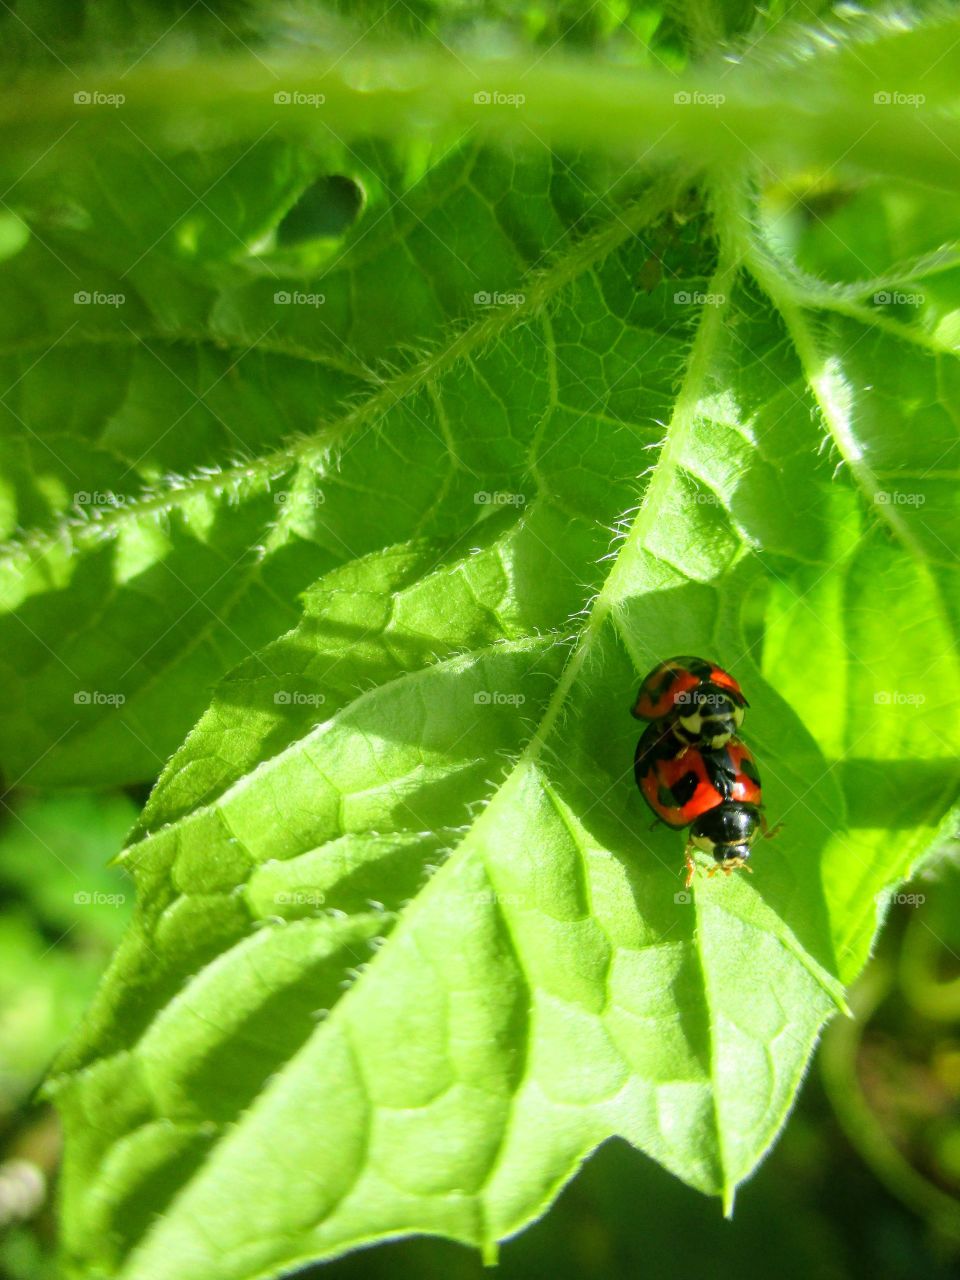 Lady bugs mating